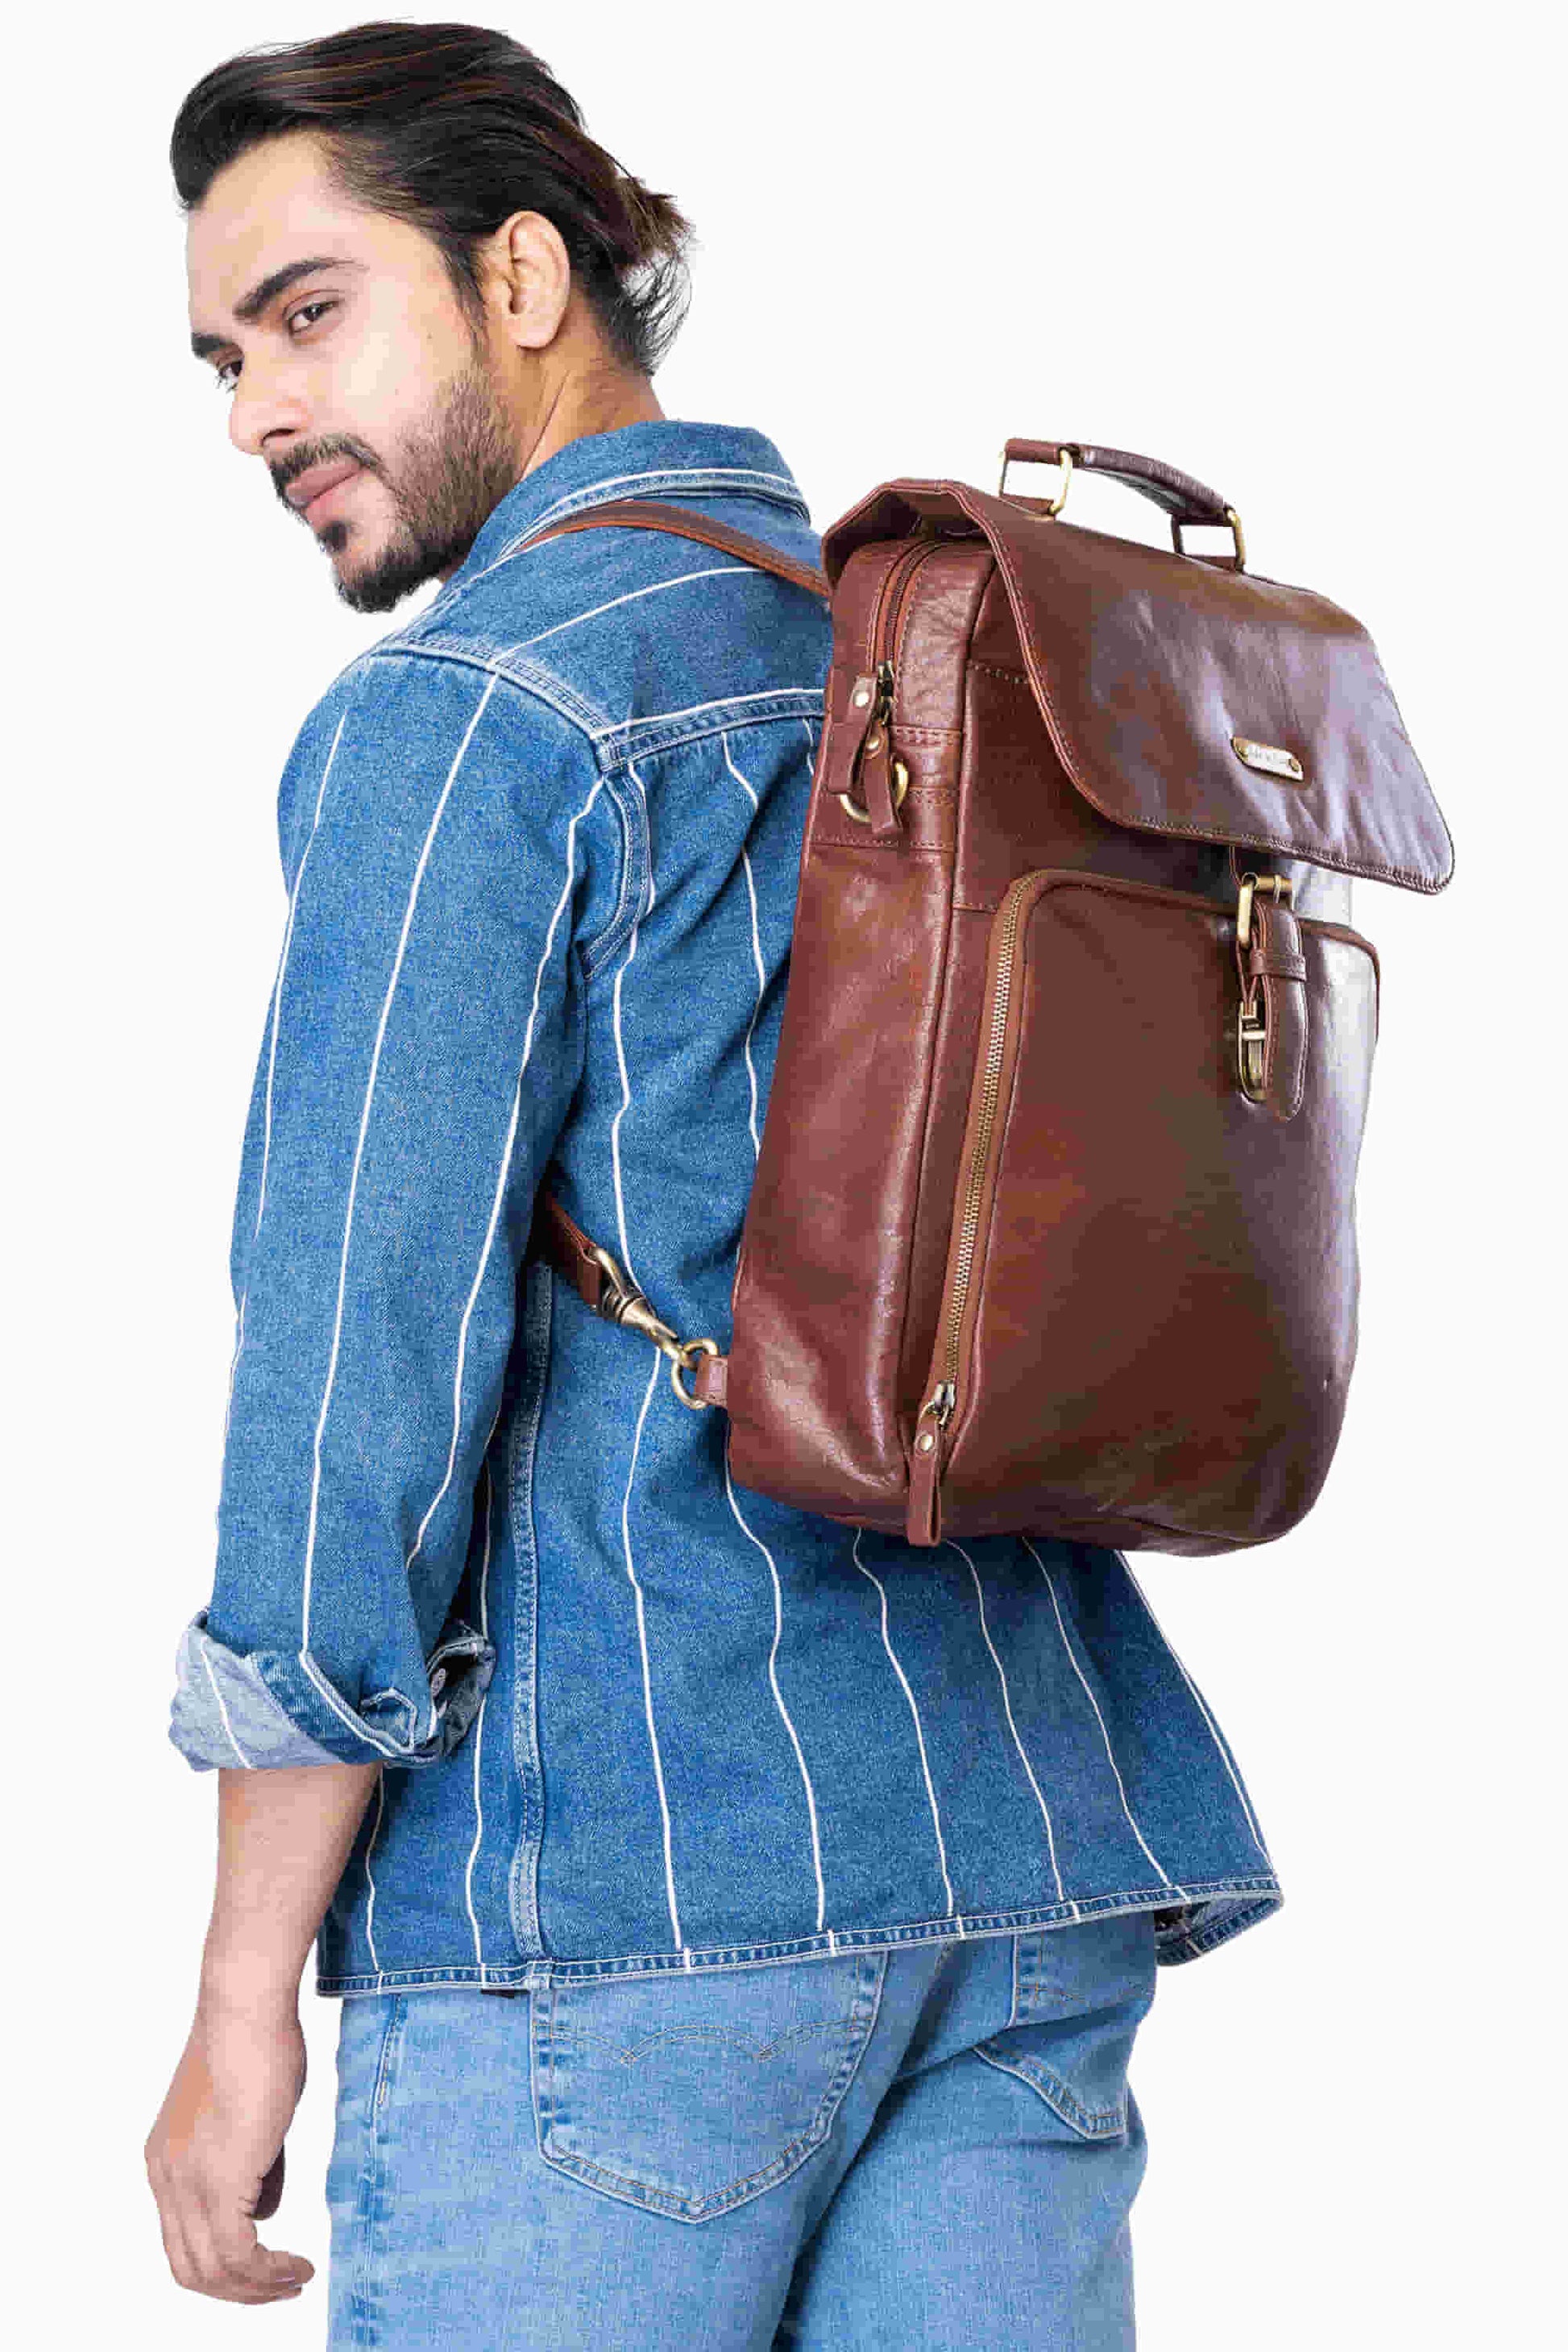 Style n Craft 392600 Cross Body Messenger Bag & Backpack in Full Grain Dark Brown Vintage Leather - in use as a backpack - side angled view